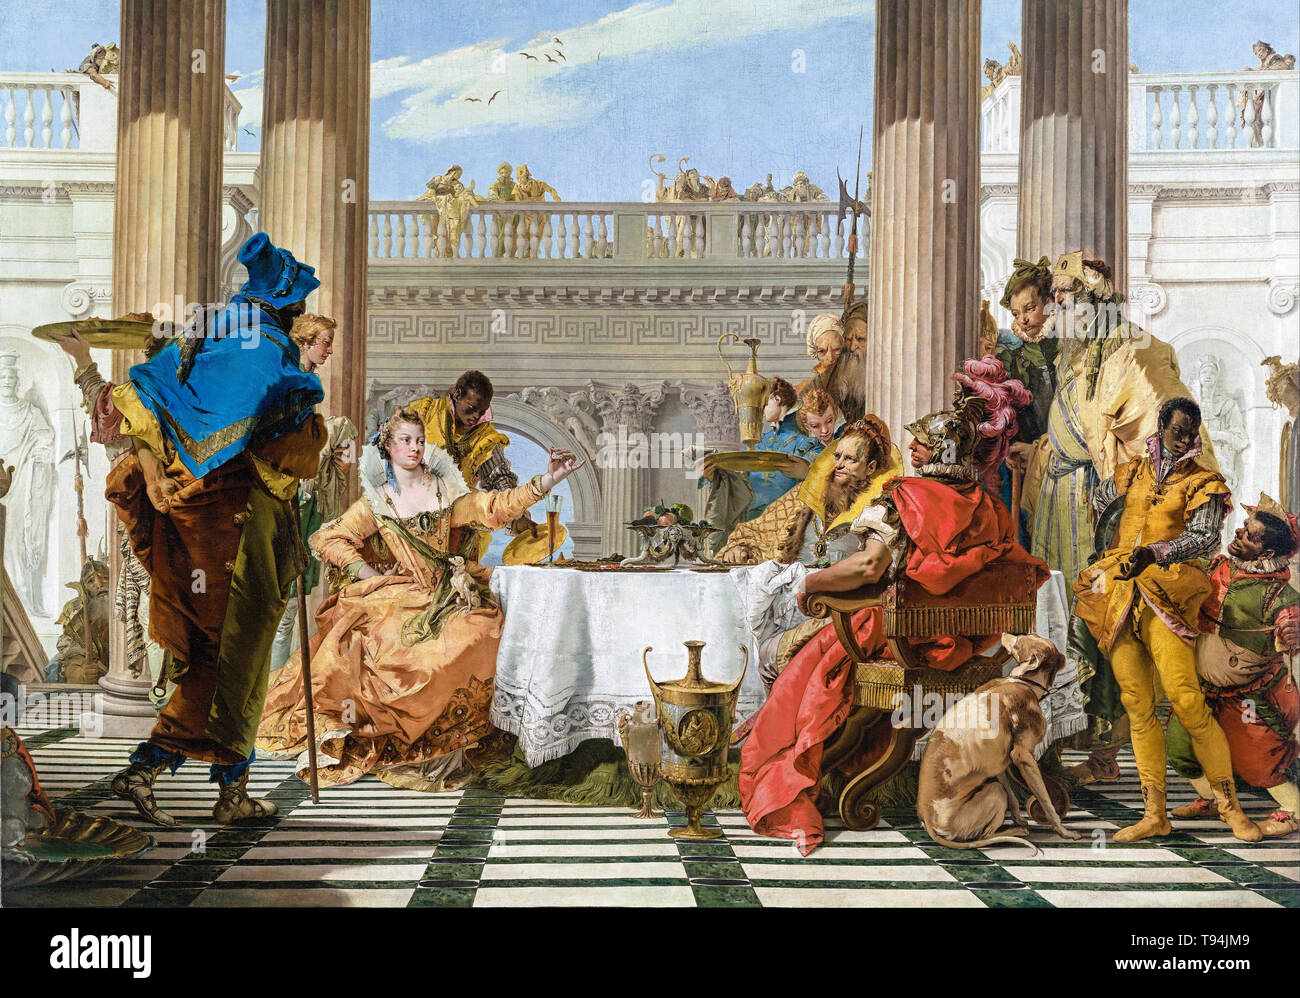 Giovanni Battista Tiepolo, The Banquet of Cleopatra, painting, c. 1743 Stock Photo